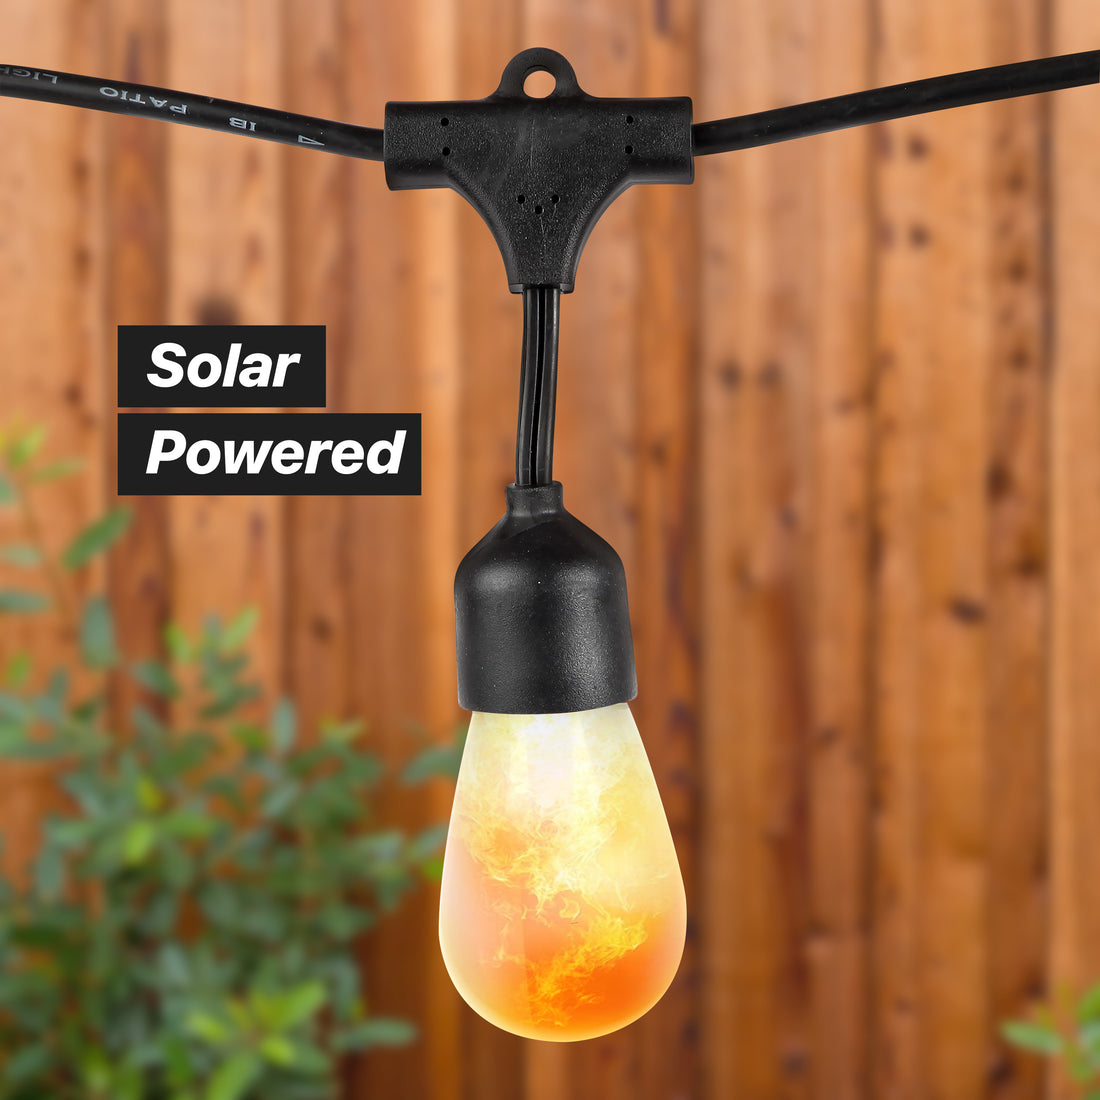 Brightech Ambience Pro with Flaming, Flickering LED Bulbs - Solar Panel Powered Hanging String Lights - Commercial Grade Waterproof, Shatterproof Cafe Lights Create Ambience In Your Yard, Deck - 27 Ft